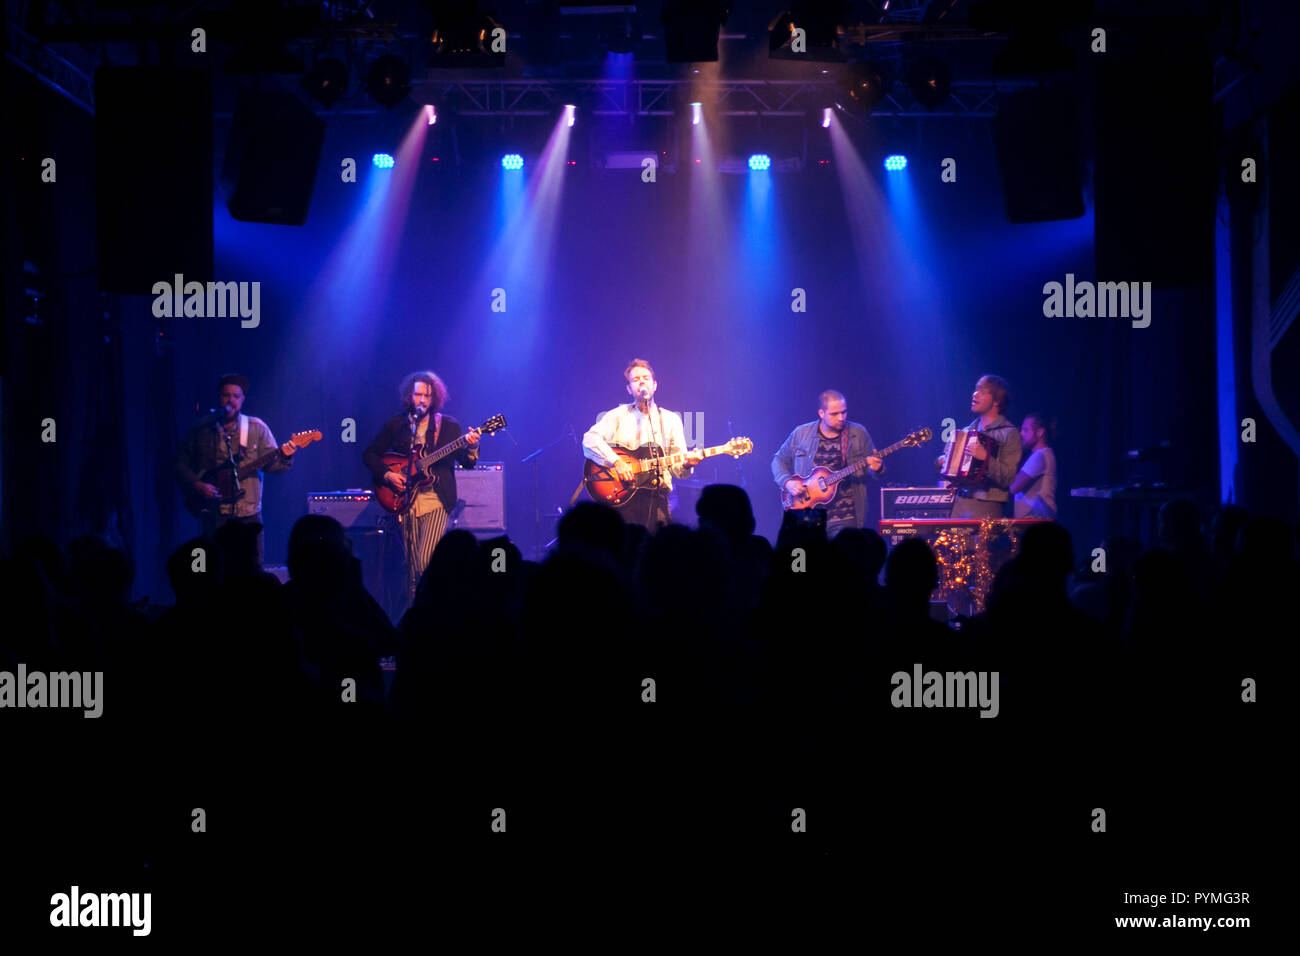 Germany, Cologne - September 15, 2018. The German band Swutscher performs a live concert at Gebäude 9 in Cologne. (Photo credit: Gonzales Photo - Thomas Neukum). Stock Photo